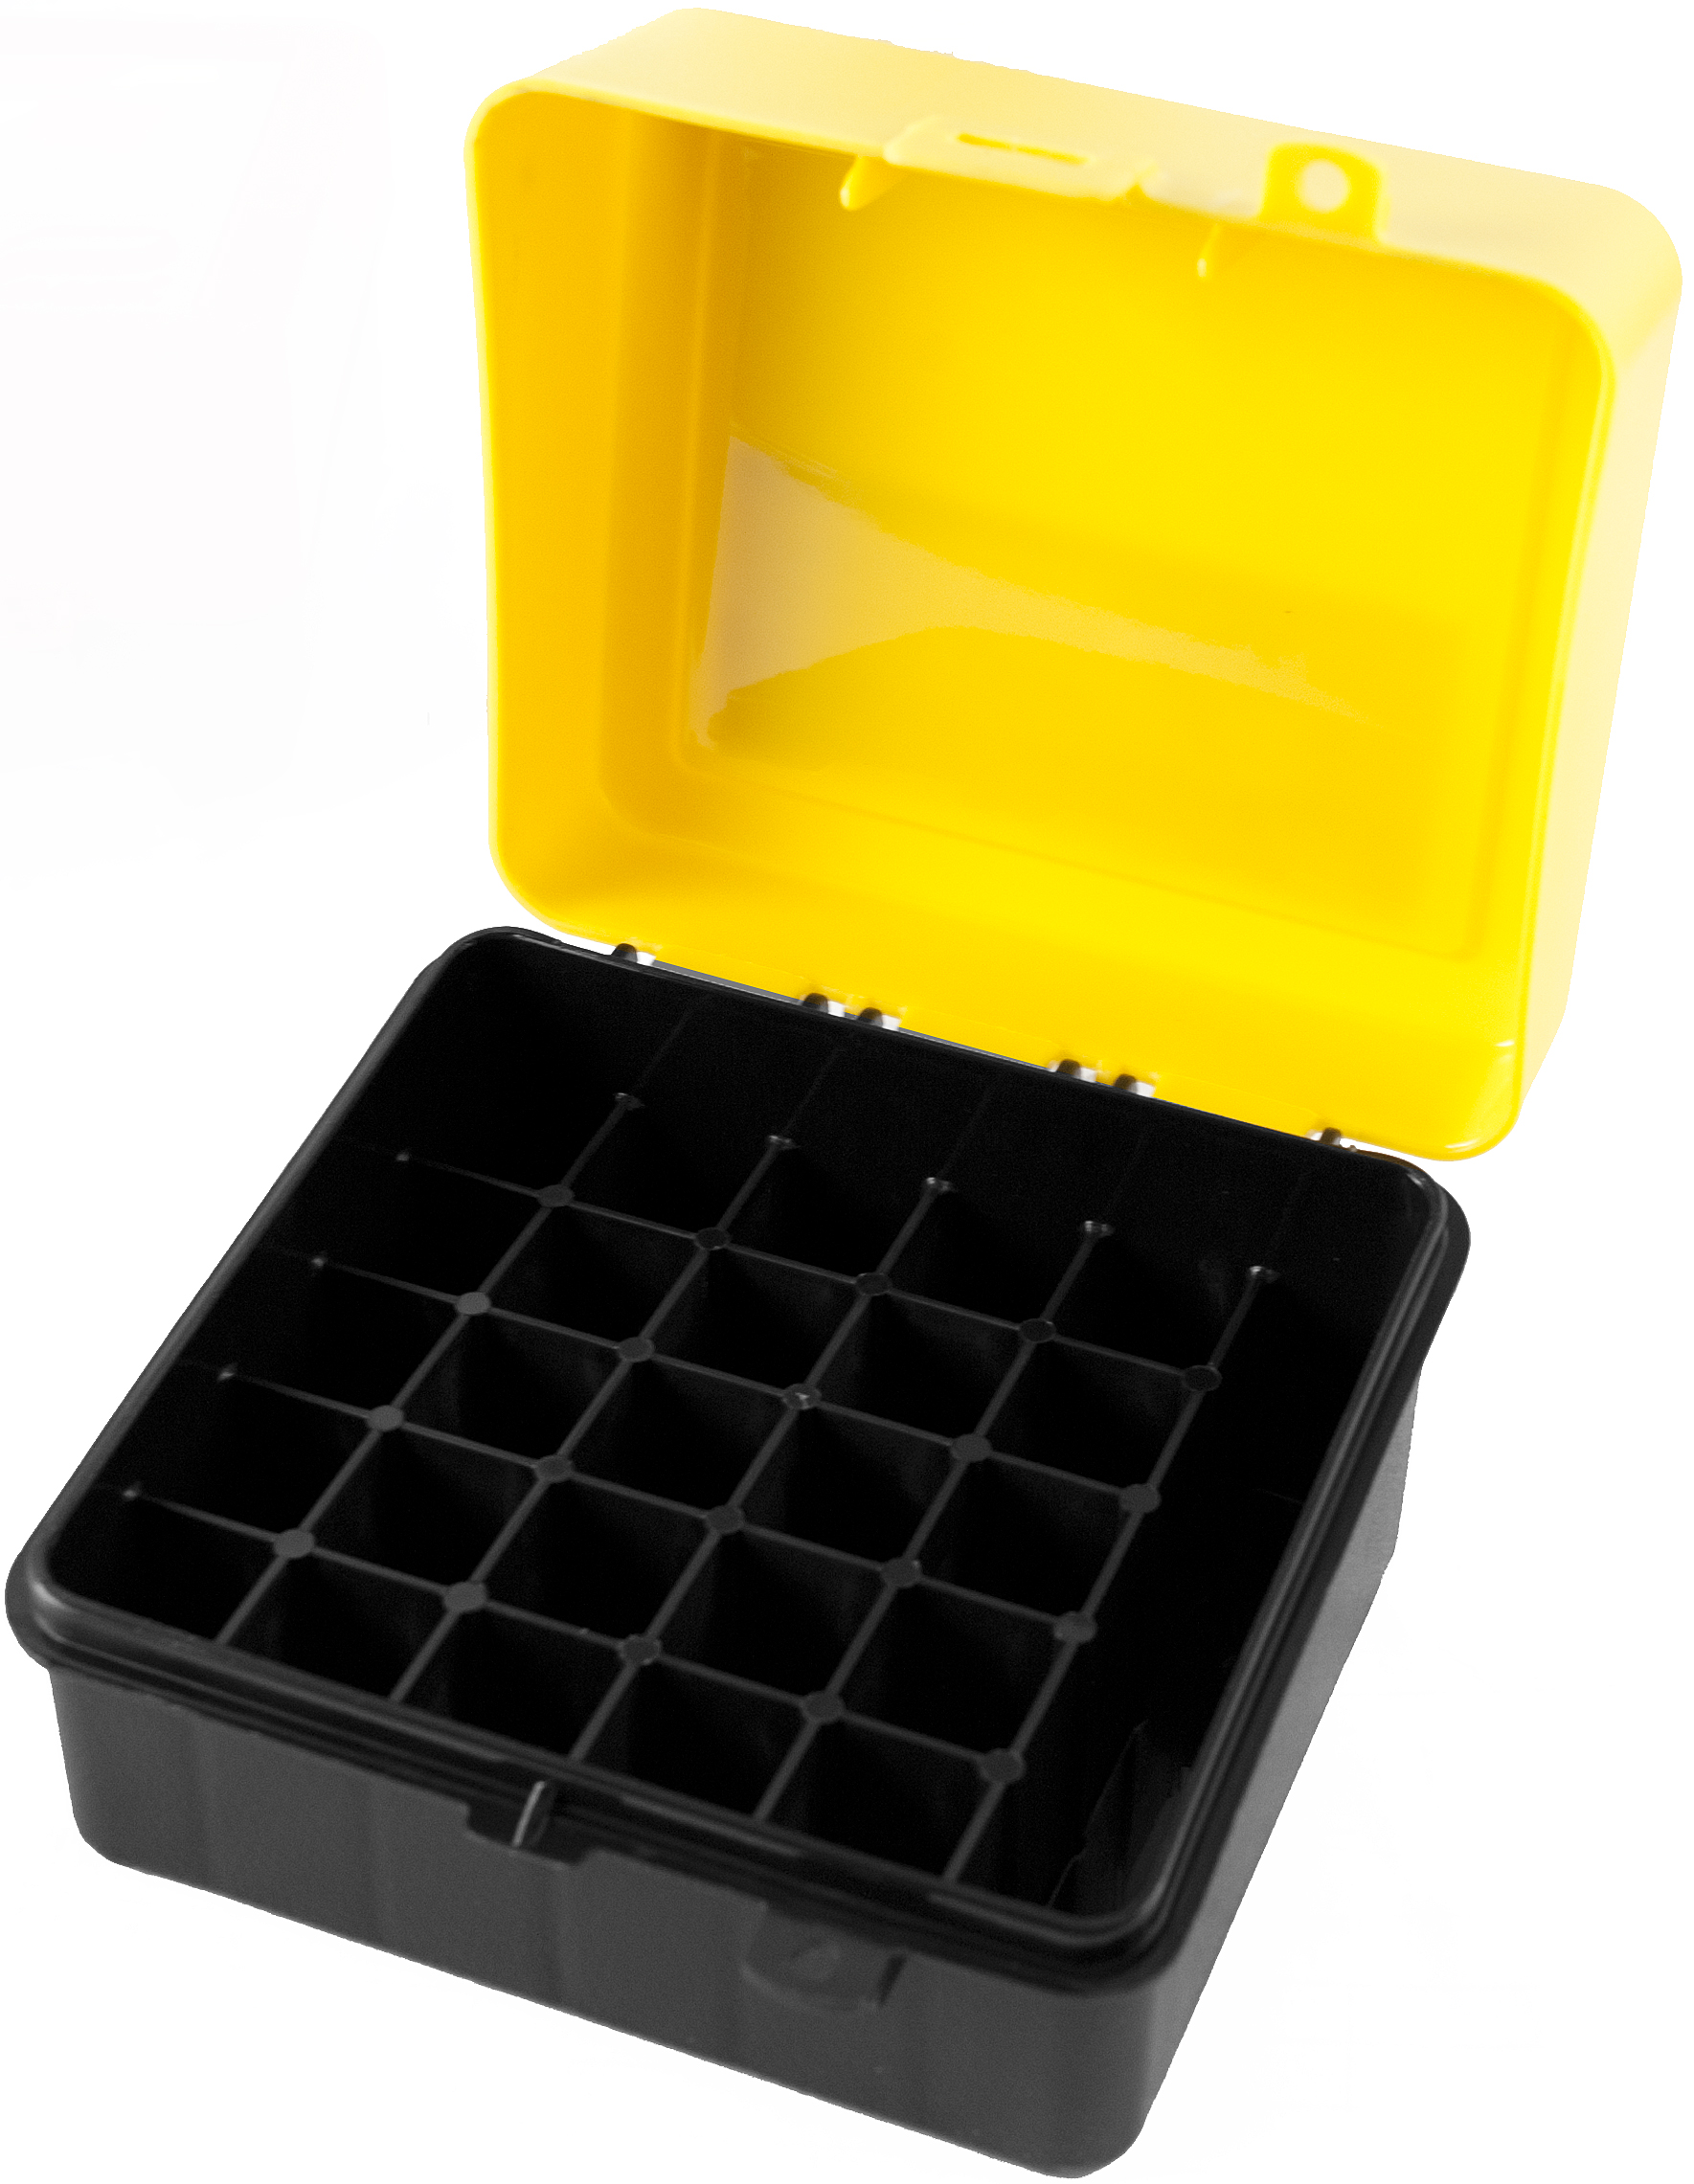 Plano Shot Shell Box Holds 20 Gauge 3.5 inch and 2.75 inch Shells Yellow 